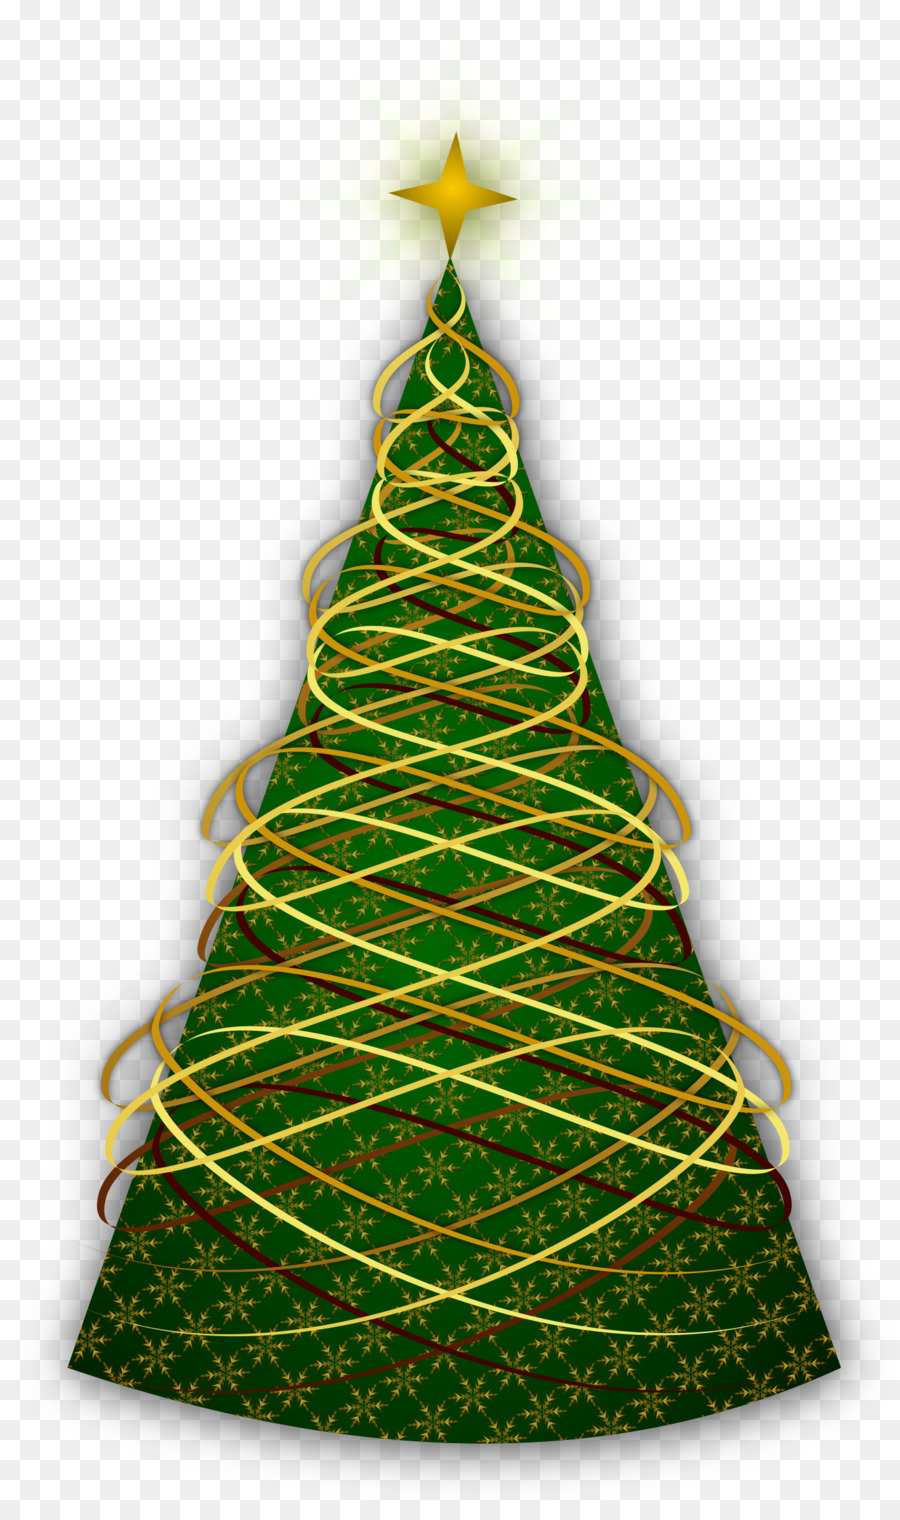 Christmas tree Christmas ornament New Year tree - simple and elegant png download - 1438*2400 - Free Transparent Christmas Tree png Download.